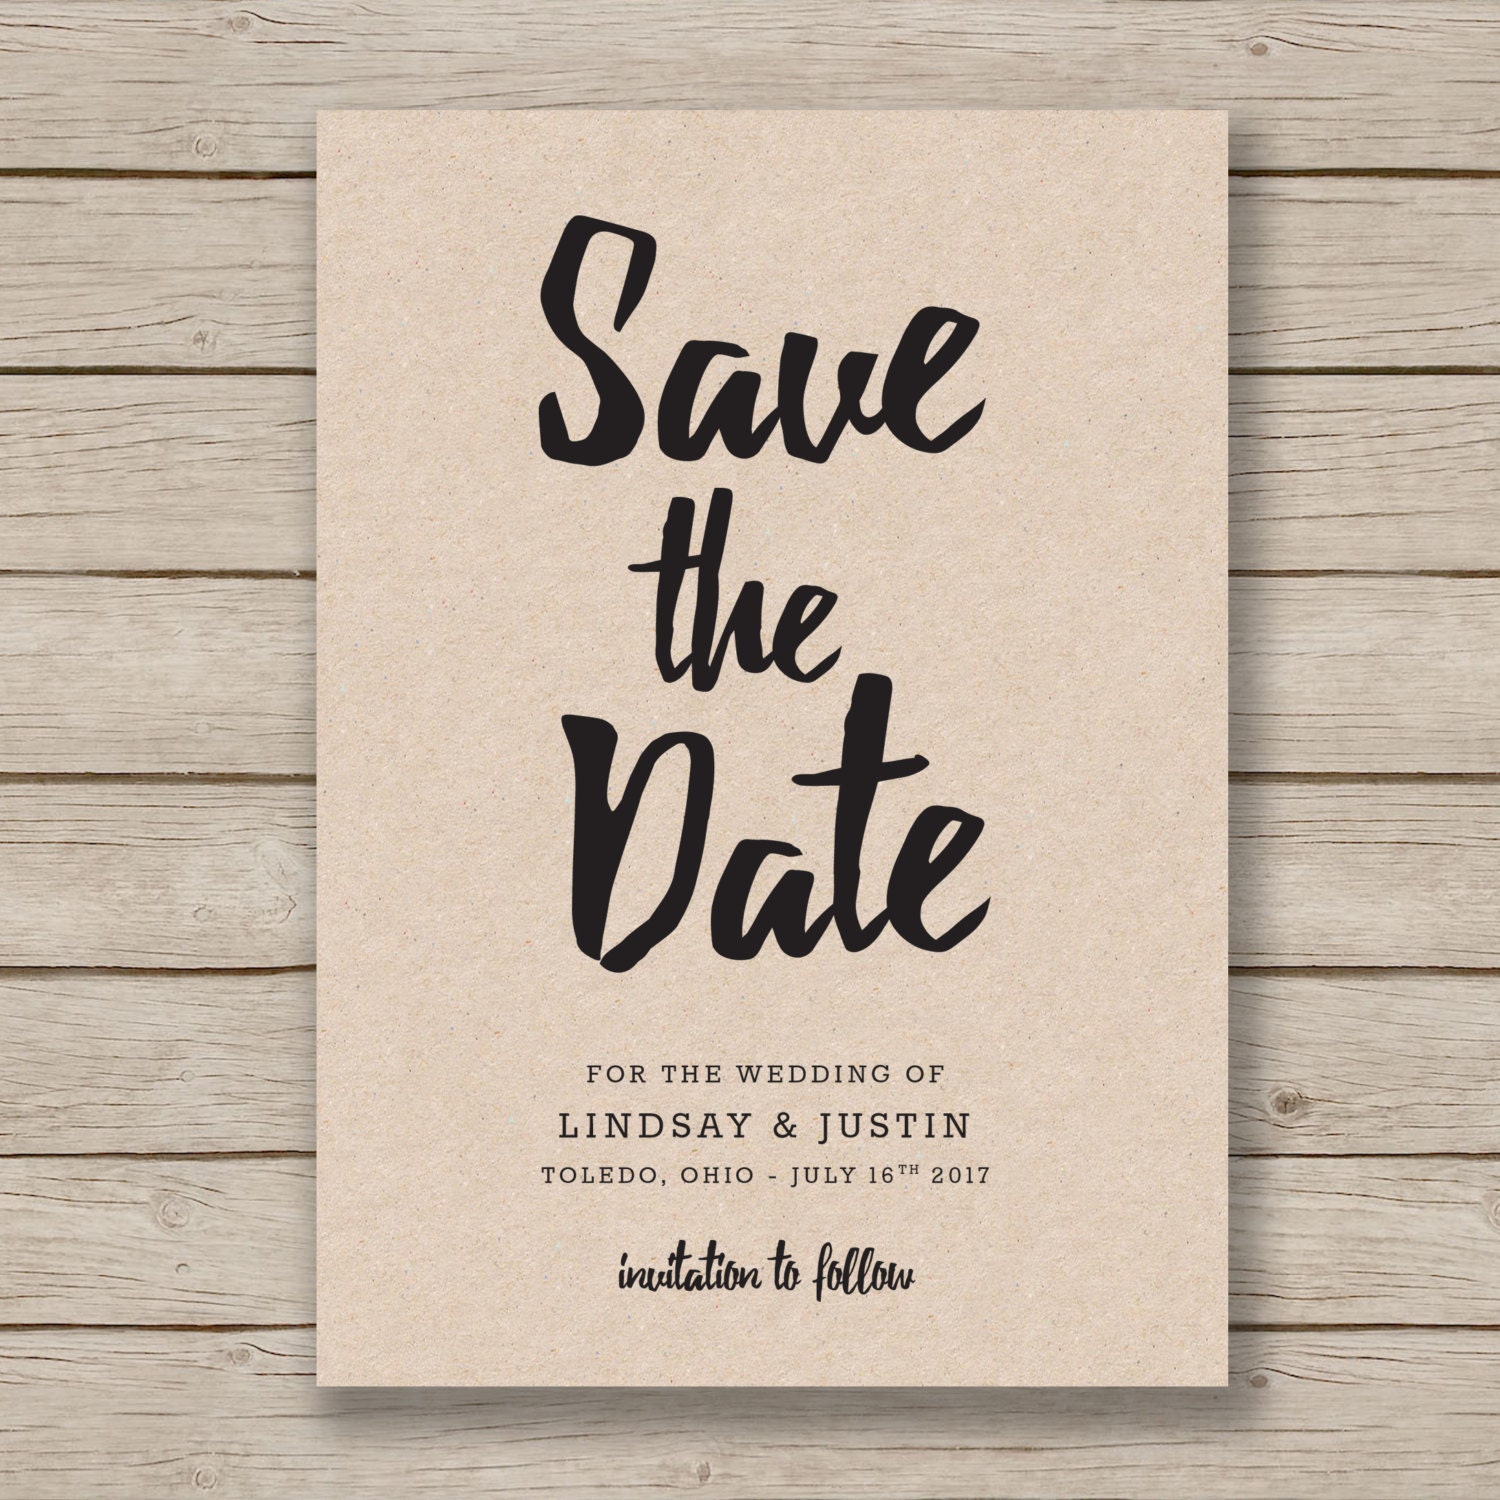 ms word save the date flyer template